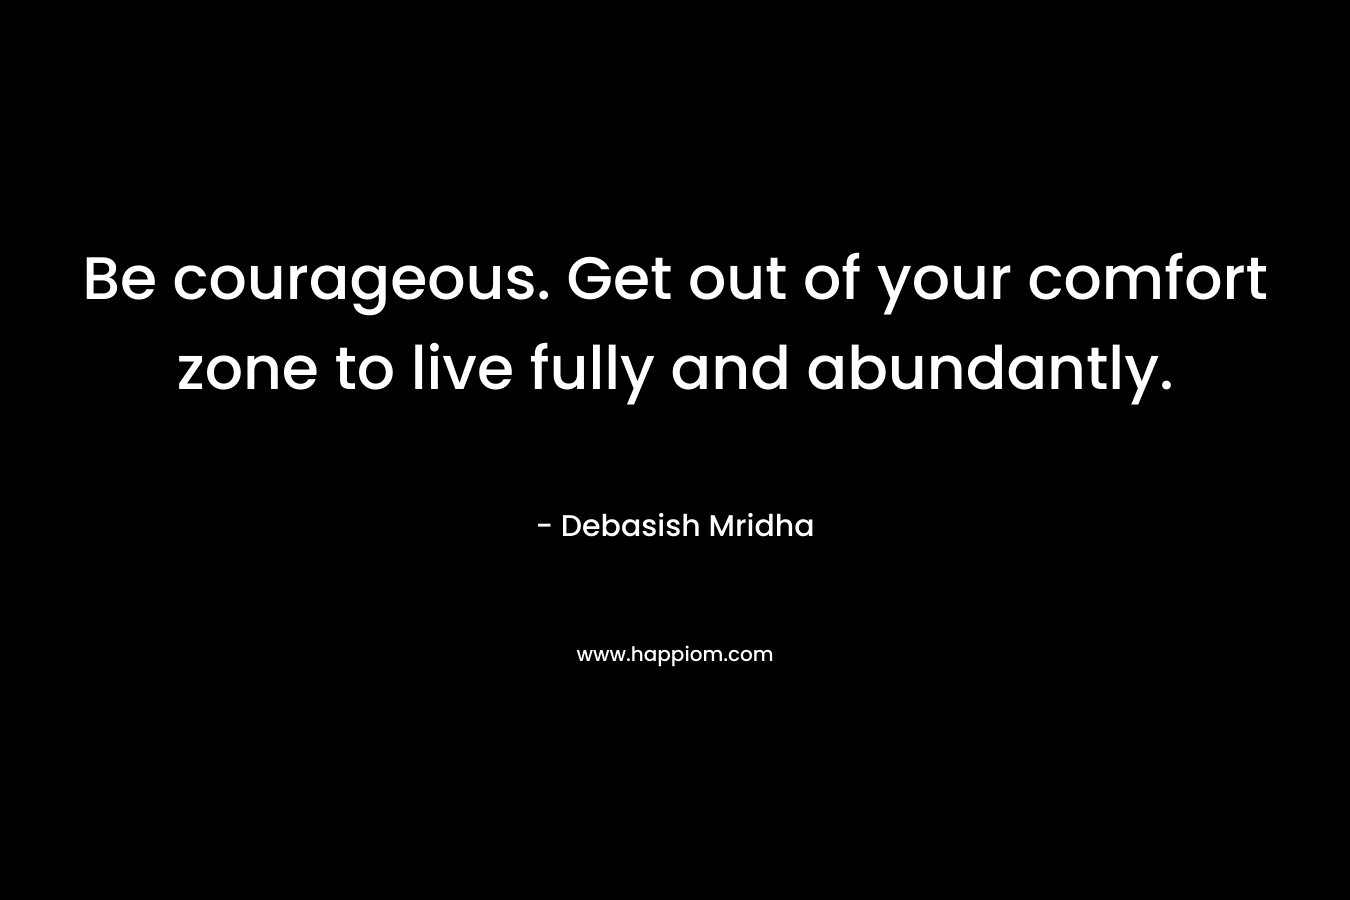 Be courageous. Get out of your comfort zone to live fully and abundantly.